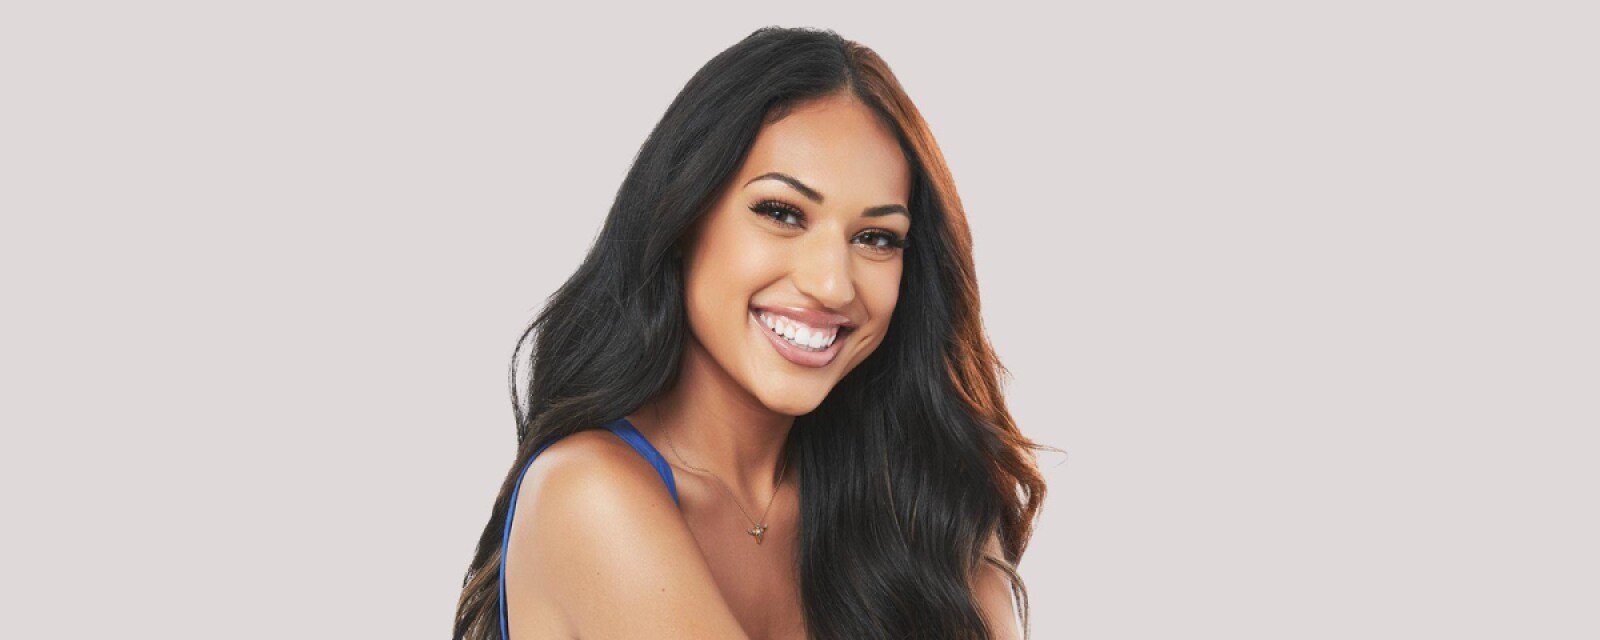 Mercedes from 'The Bachelor' season 27